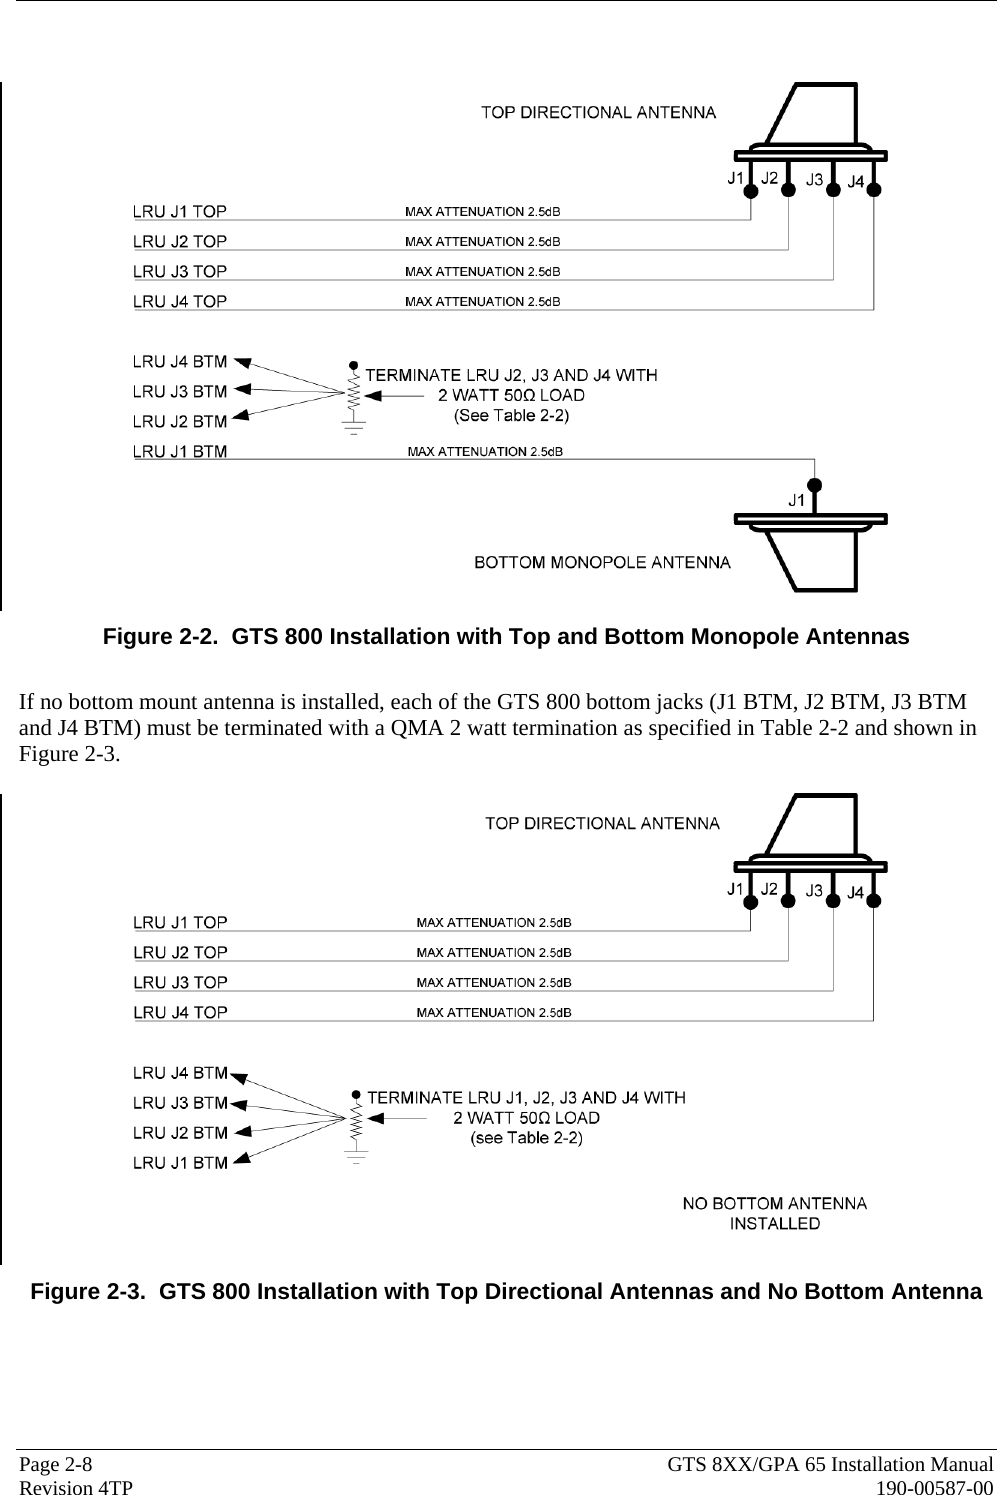  Page 2-8  GTS 8XX/GPA 65 Installation Manual Revision 4TP  190-00587-00    Figure 2-2.  GTS 800 Installation with Top and Bottom Monopole Antennas  If no bottom mount antenna is installed, each of the GTS 800 bottom jacks (J1 BTM, J2 BTM, J3 BTM and J4 BTM) must be terminated with a QMA 2 watt termination as specified in Table 2-2 and shown in Figure 2-3.   Figure 2-3.  GTS 800 Installation with Top Directional Antennas and No Bottom Antenna 